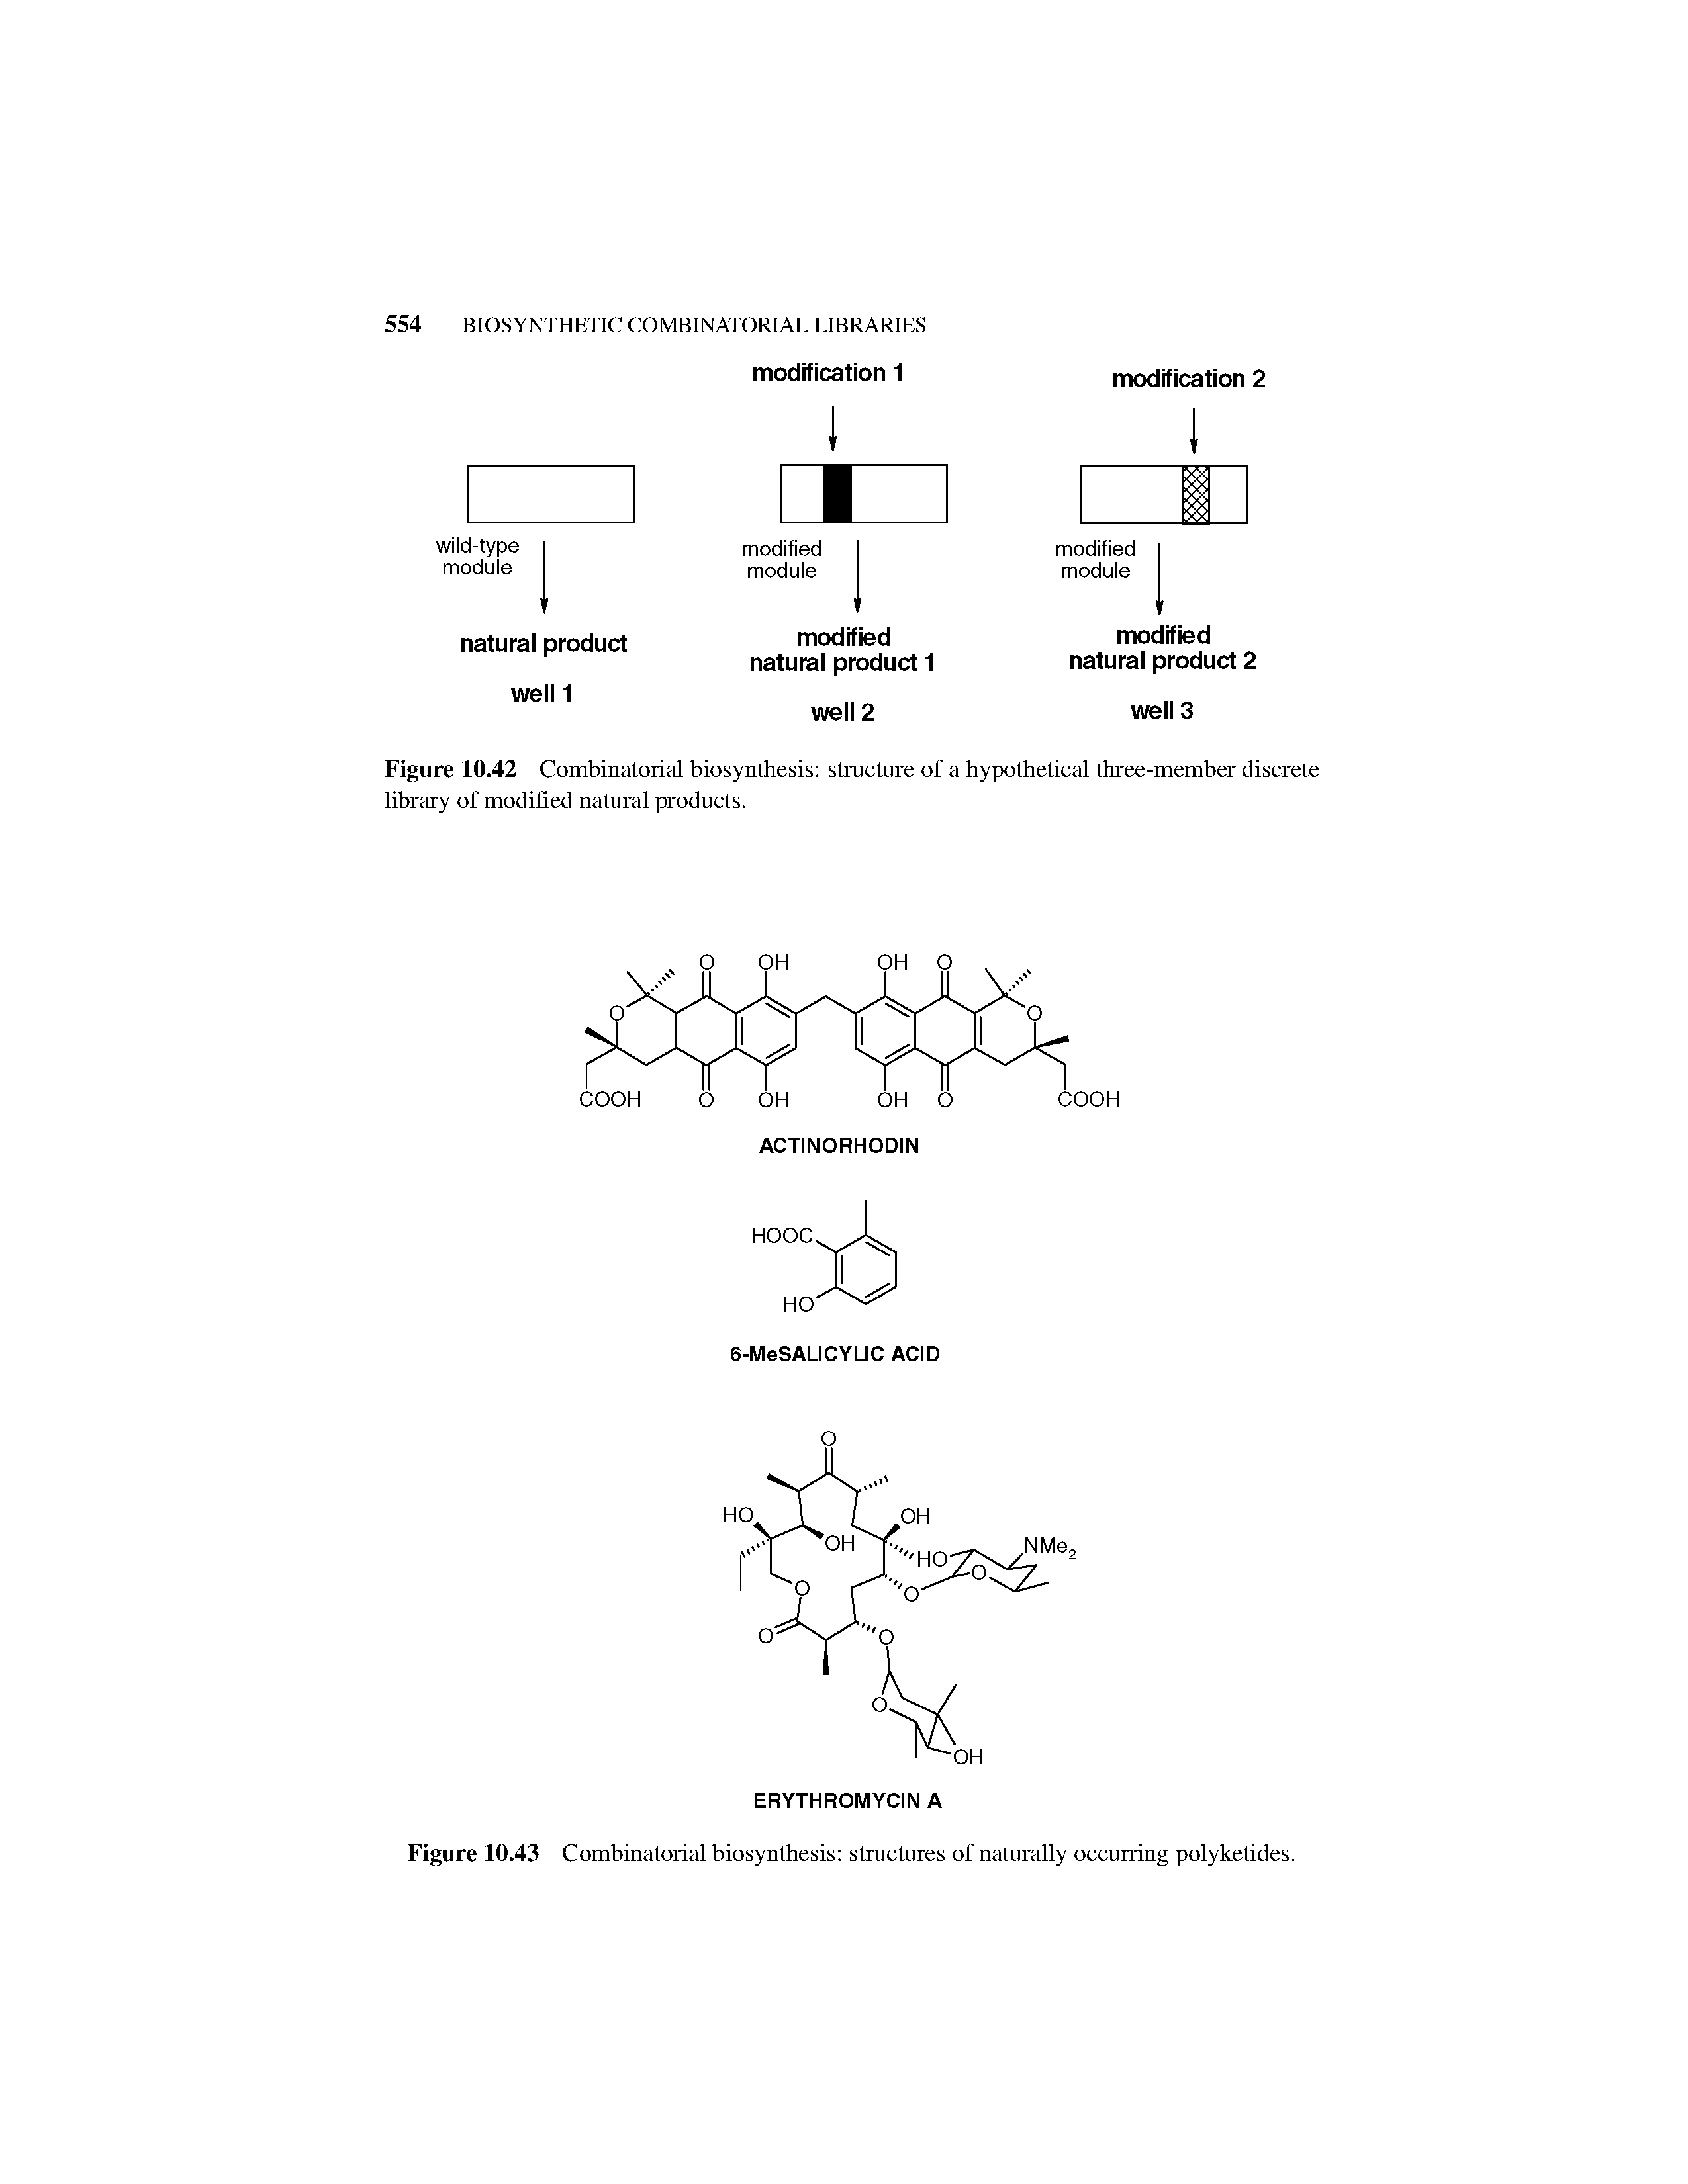 Figure 10.42 Combinatorial biosynthesis structure of a hypothetical three-member discrete library of modified natural products.